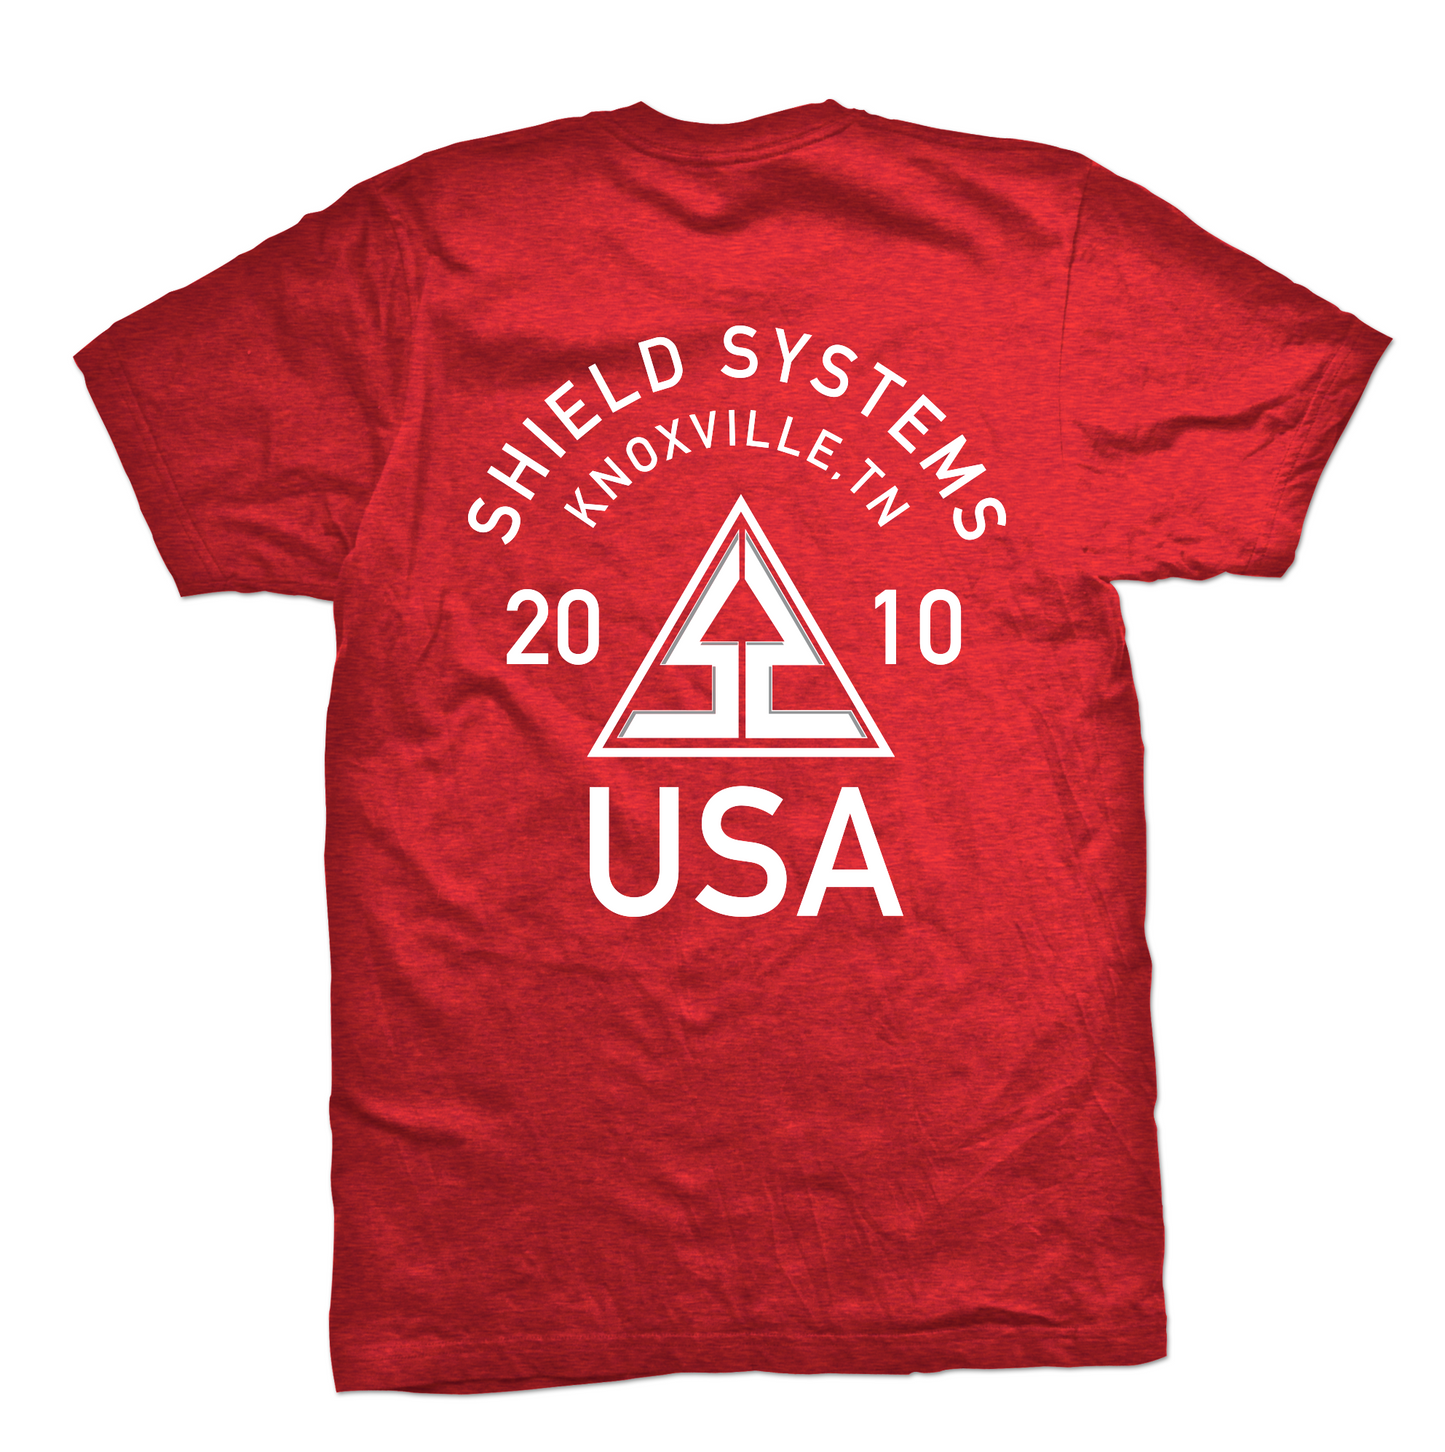 Shield Systems tee Badge, red